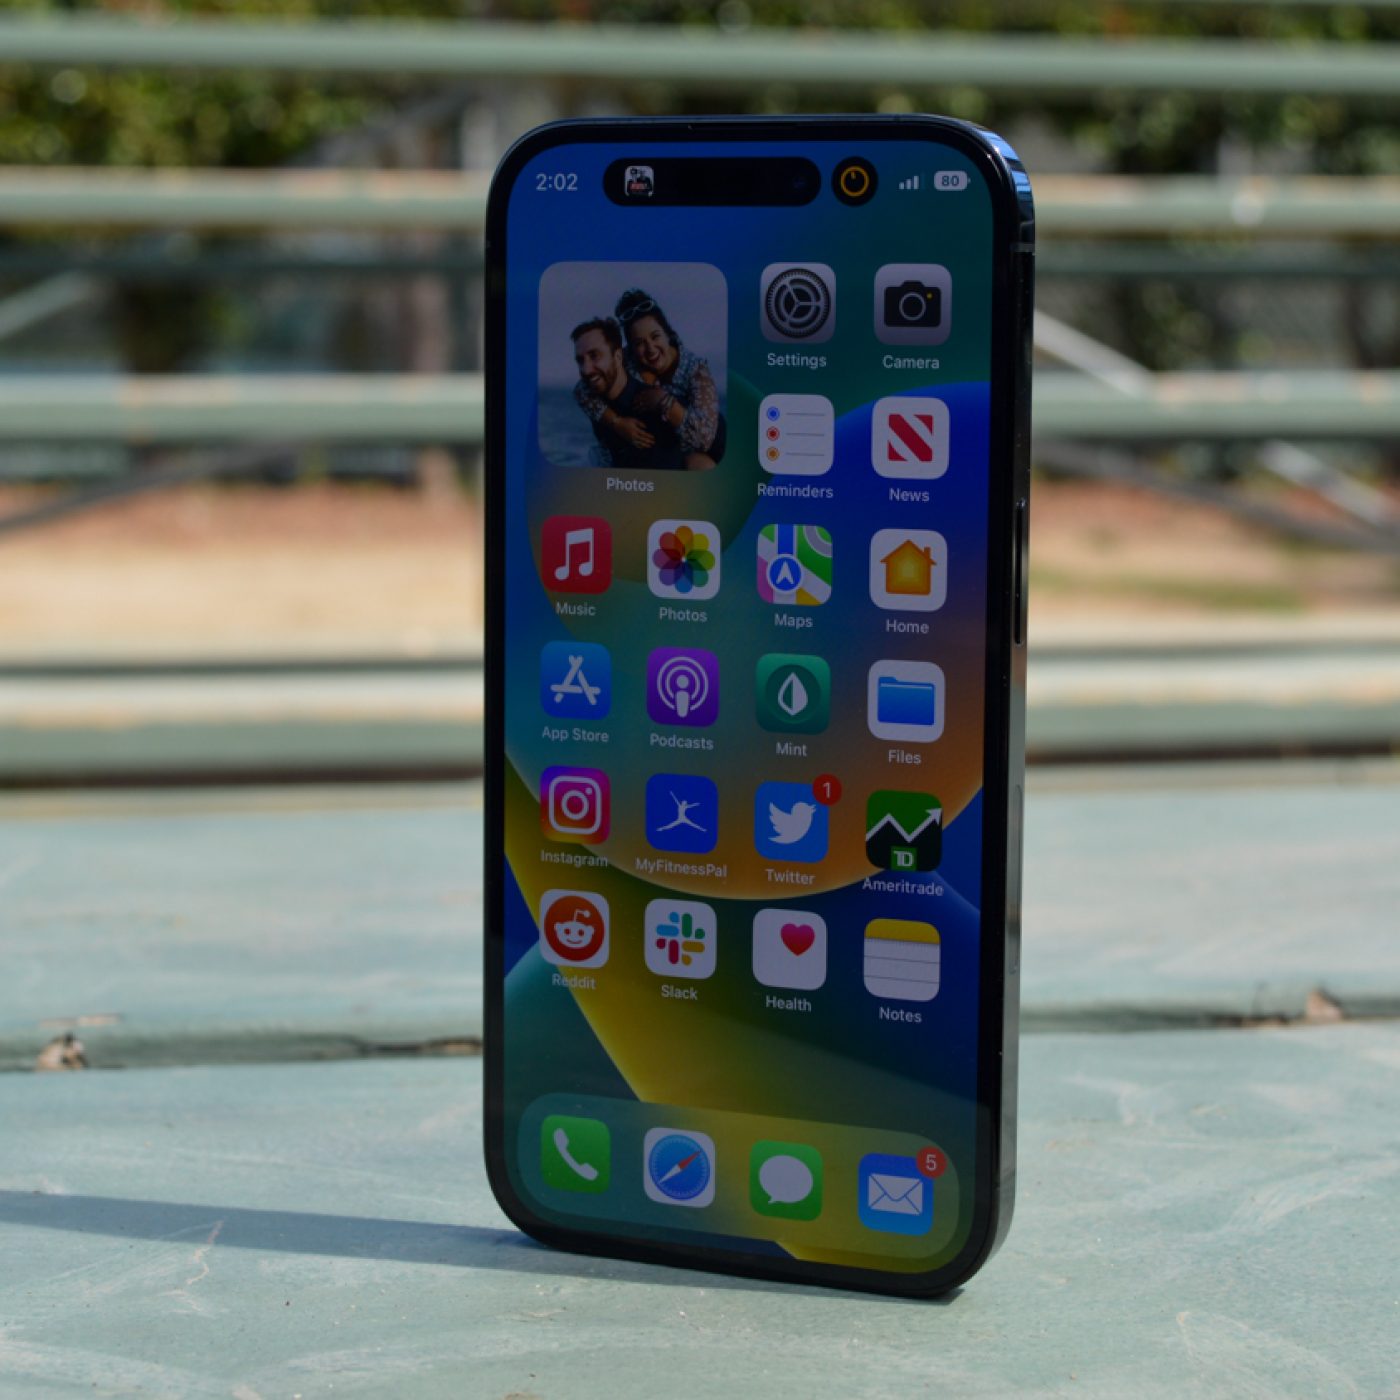 5 reasons to skip iPhone 15 Pro Max and wait for iPhone 16 Ultra